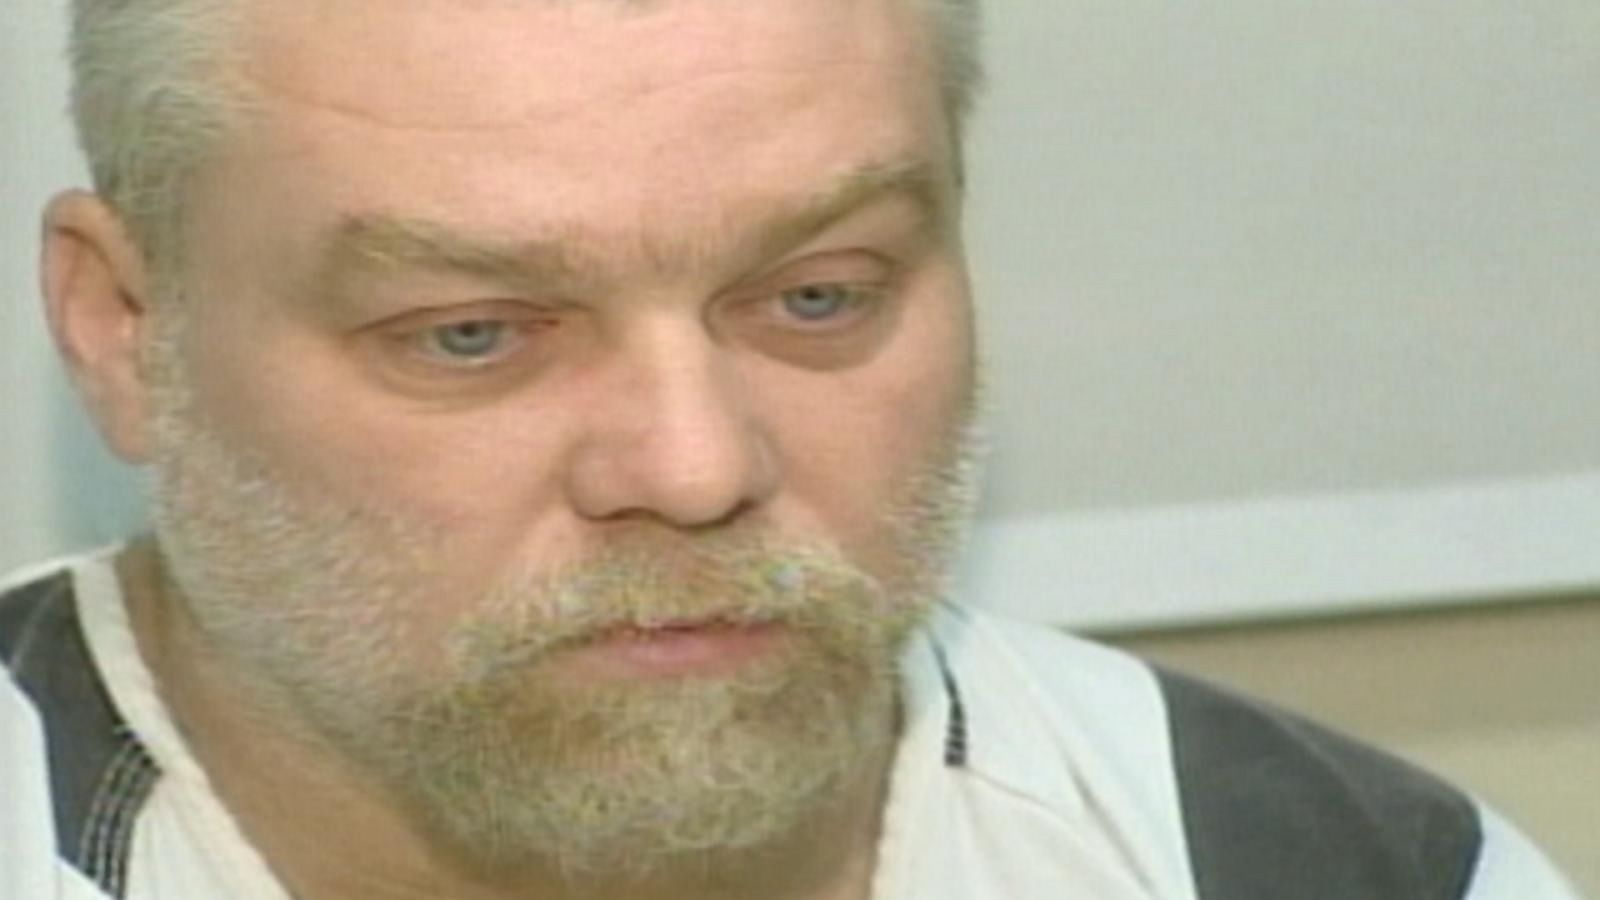 Archival Video Steven Avery Faces Murder Charges Good Morning America 